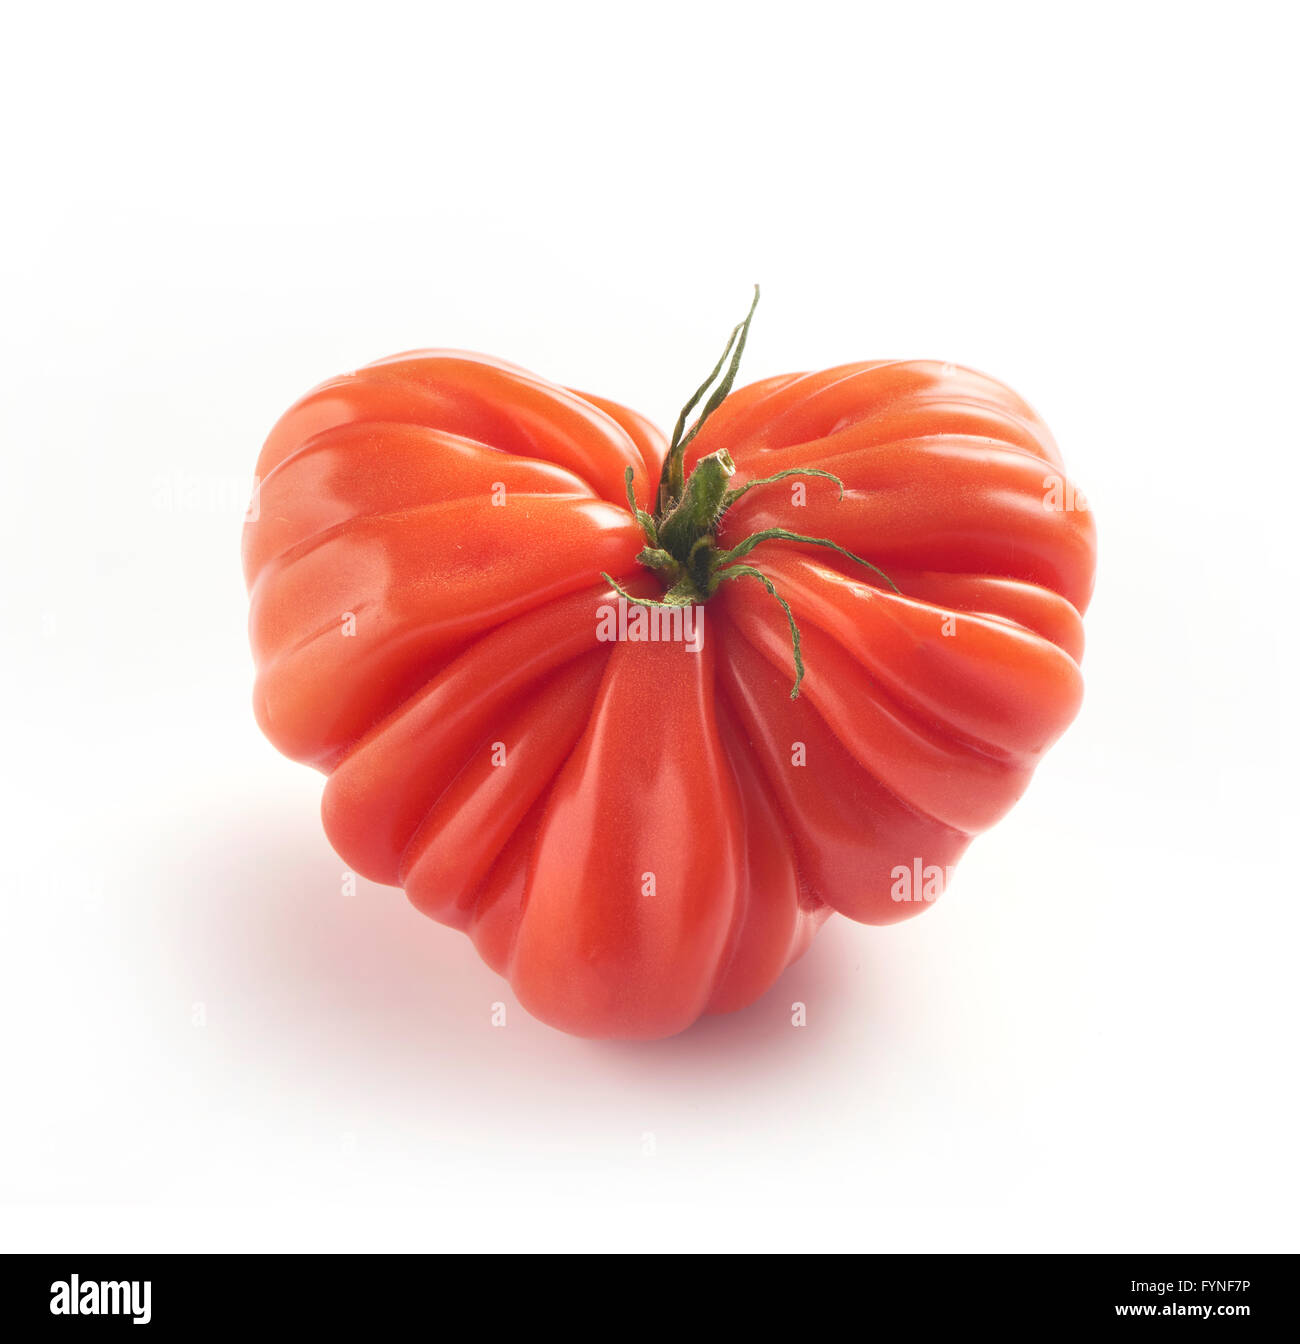 Ripe red fresh whole coeur de boeuf, or beefsteak cultivar, tomato displayed on a white background with shadow Stock Photo